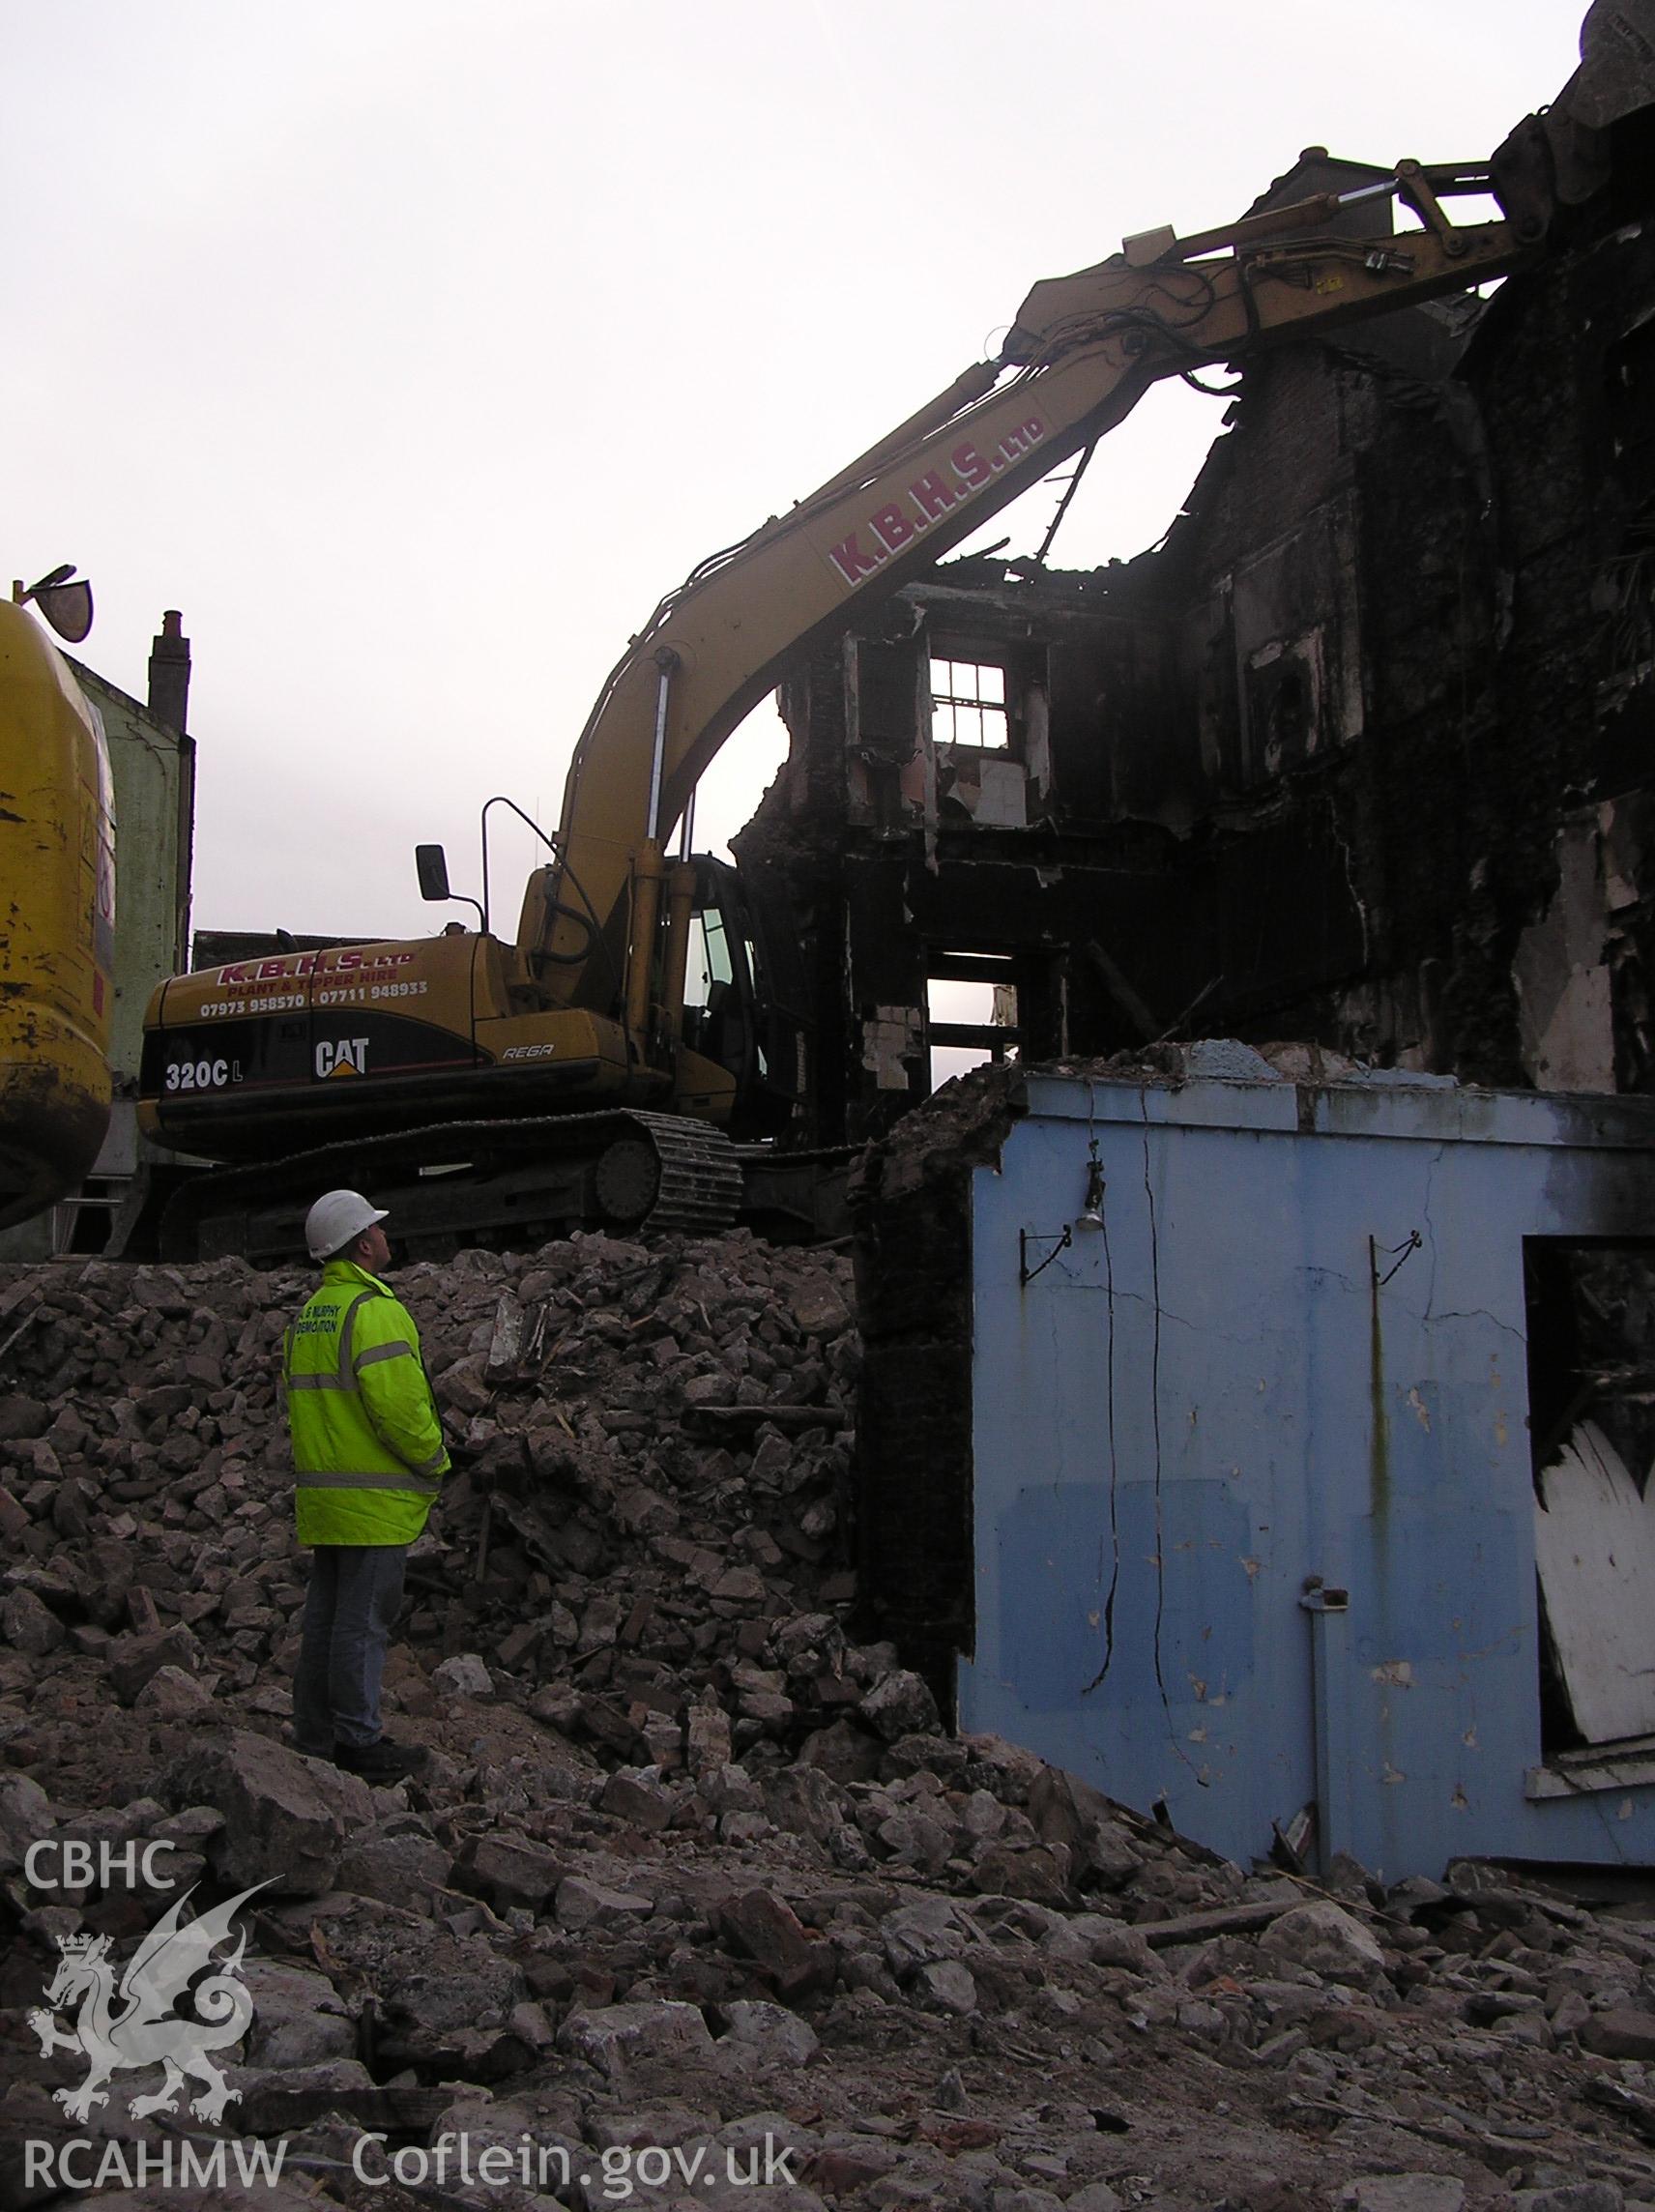 Colour digital photograph showing The Royal Gatehouse Hotel being demolished.